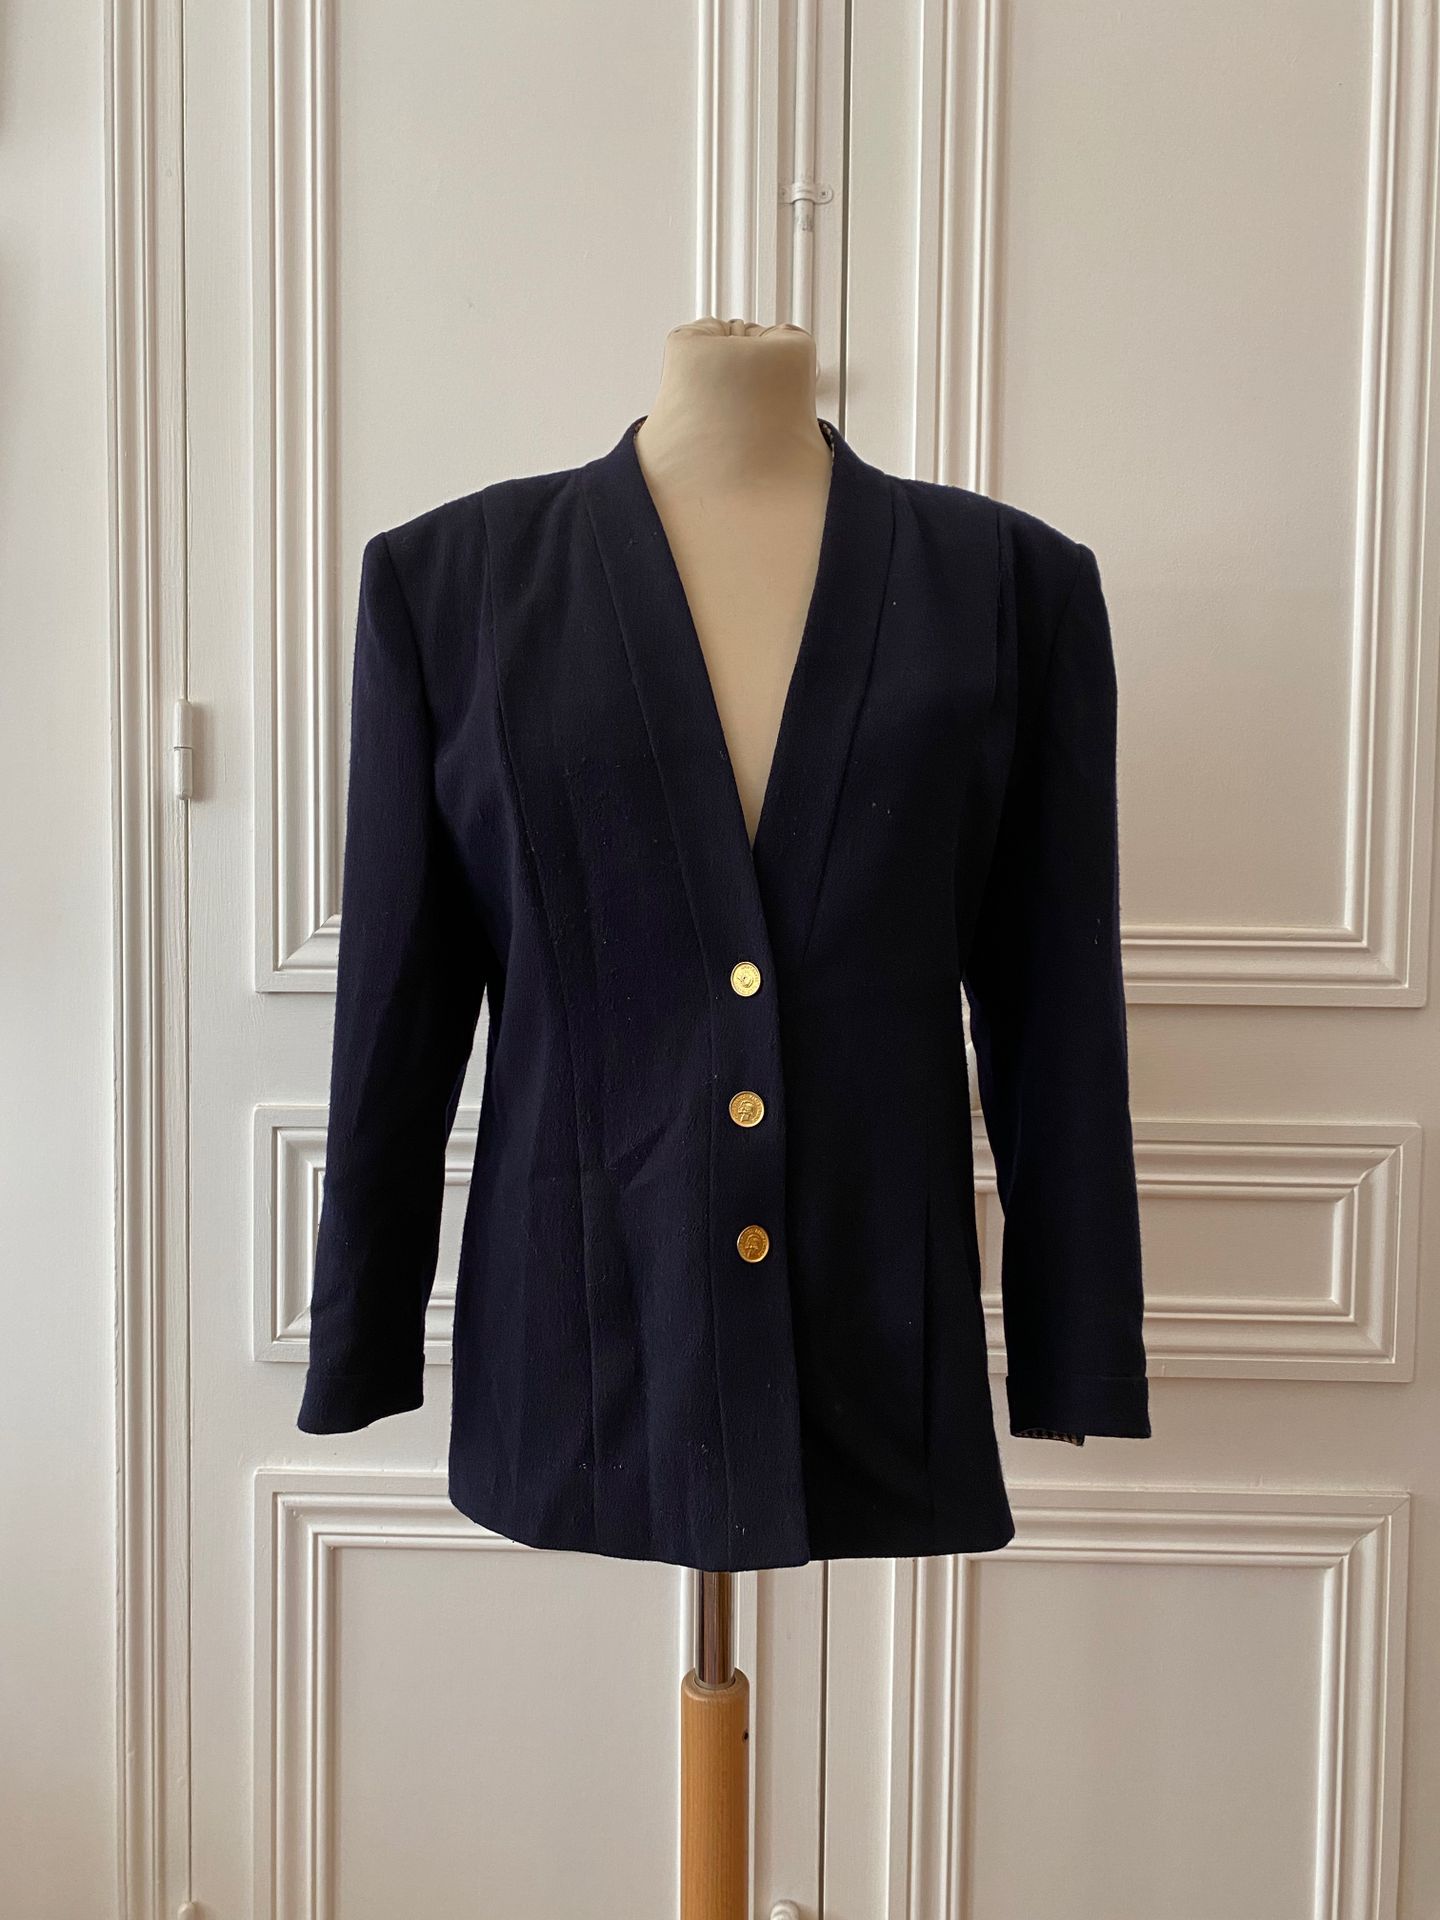 Null CHANEL Boutique
Navy wool jacket, gold metal buttons with Coco Chanel profi&hellip;